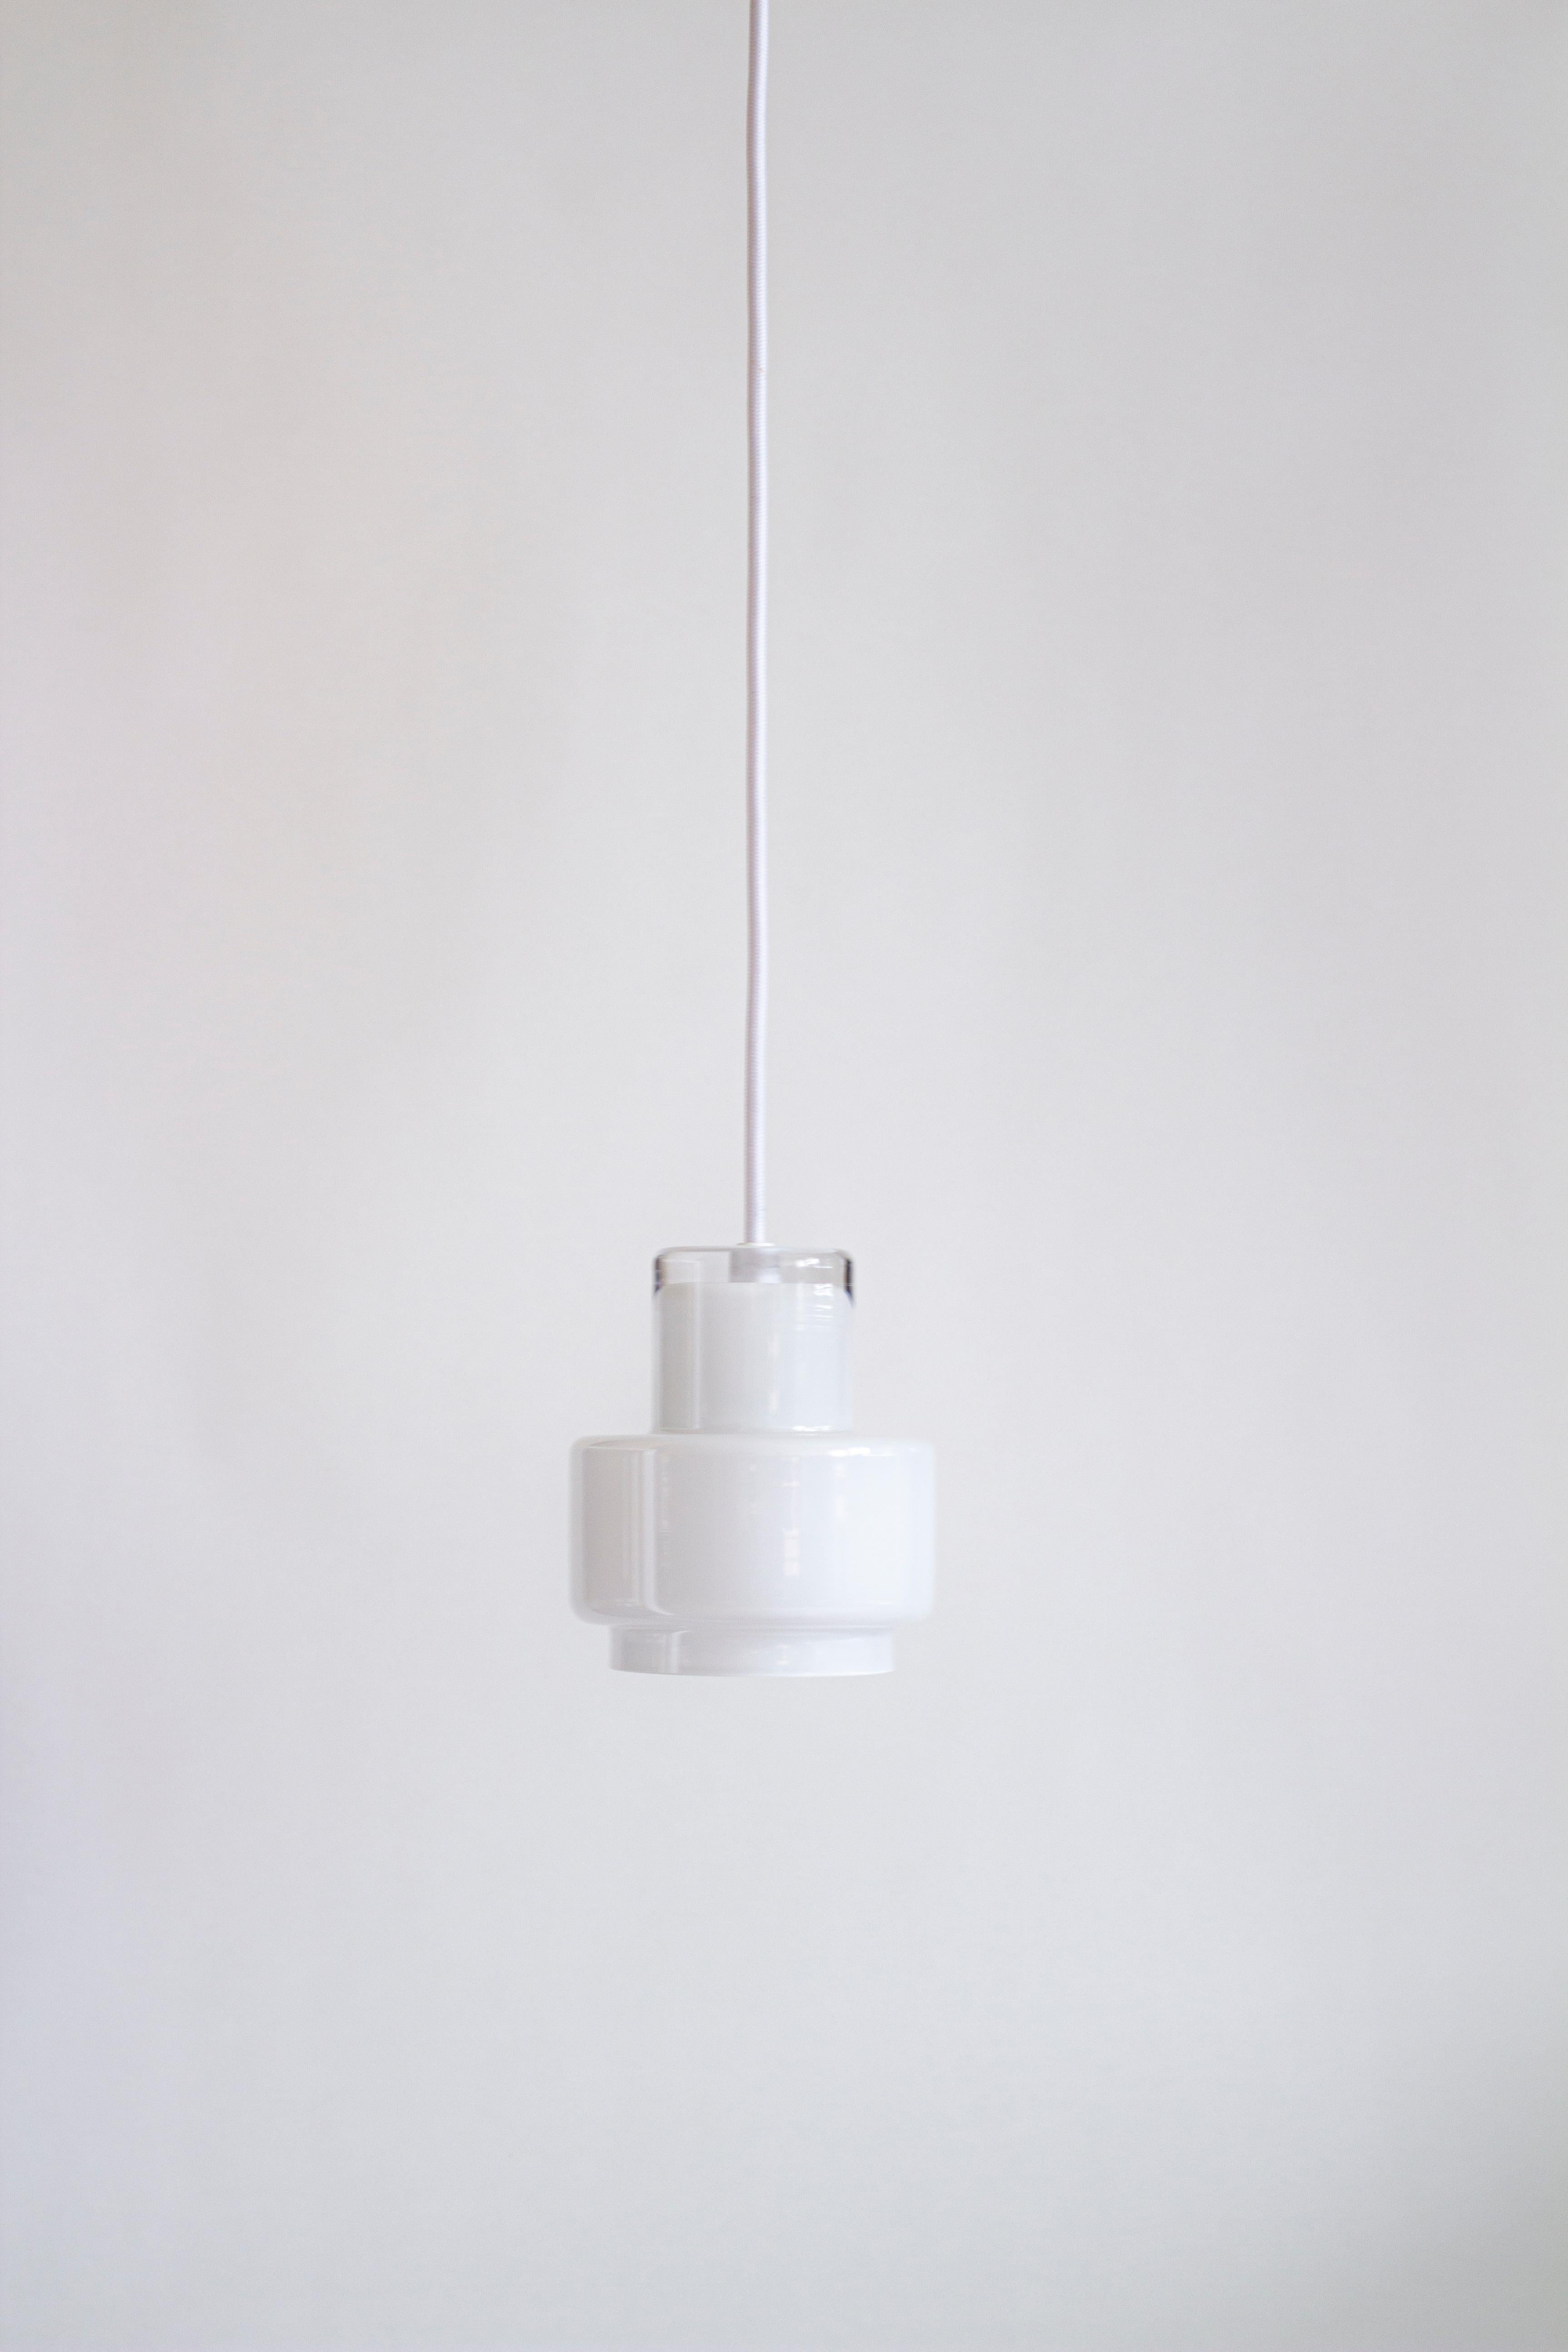 'Multi L' Glass Pendant in Black by Jokinen and Konu for Innolux 12